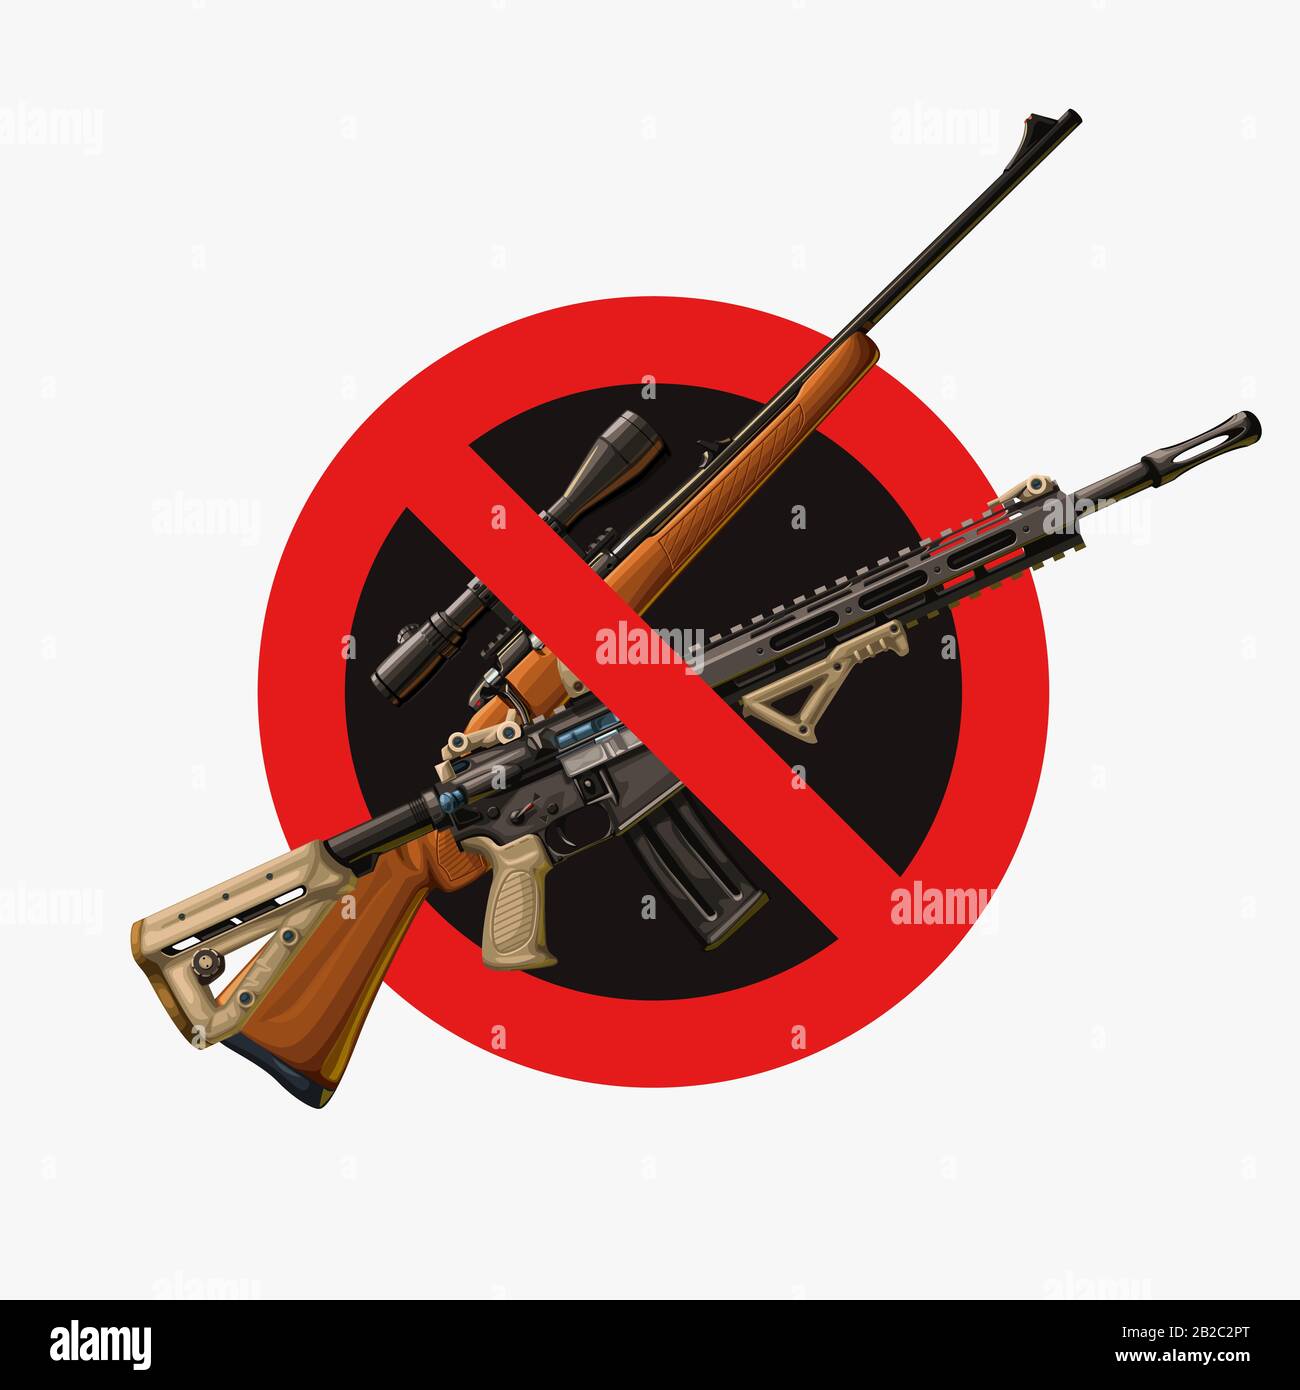 no weapons red circle sign Stock Vector